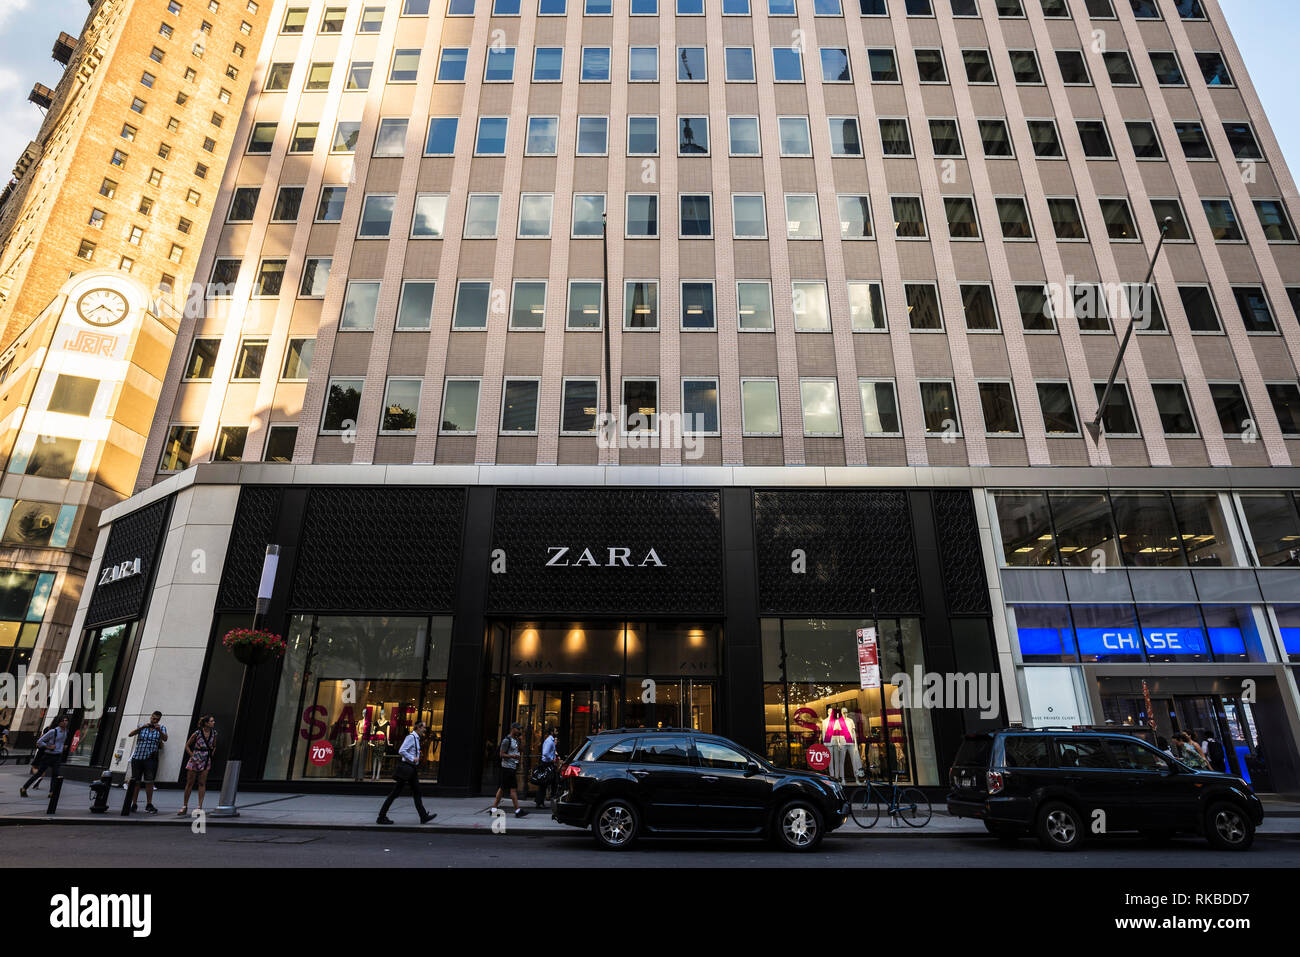 Zara Store Usa High Resolution Stock Photography and Images - Alamy